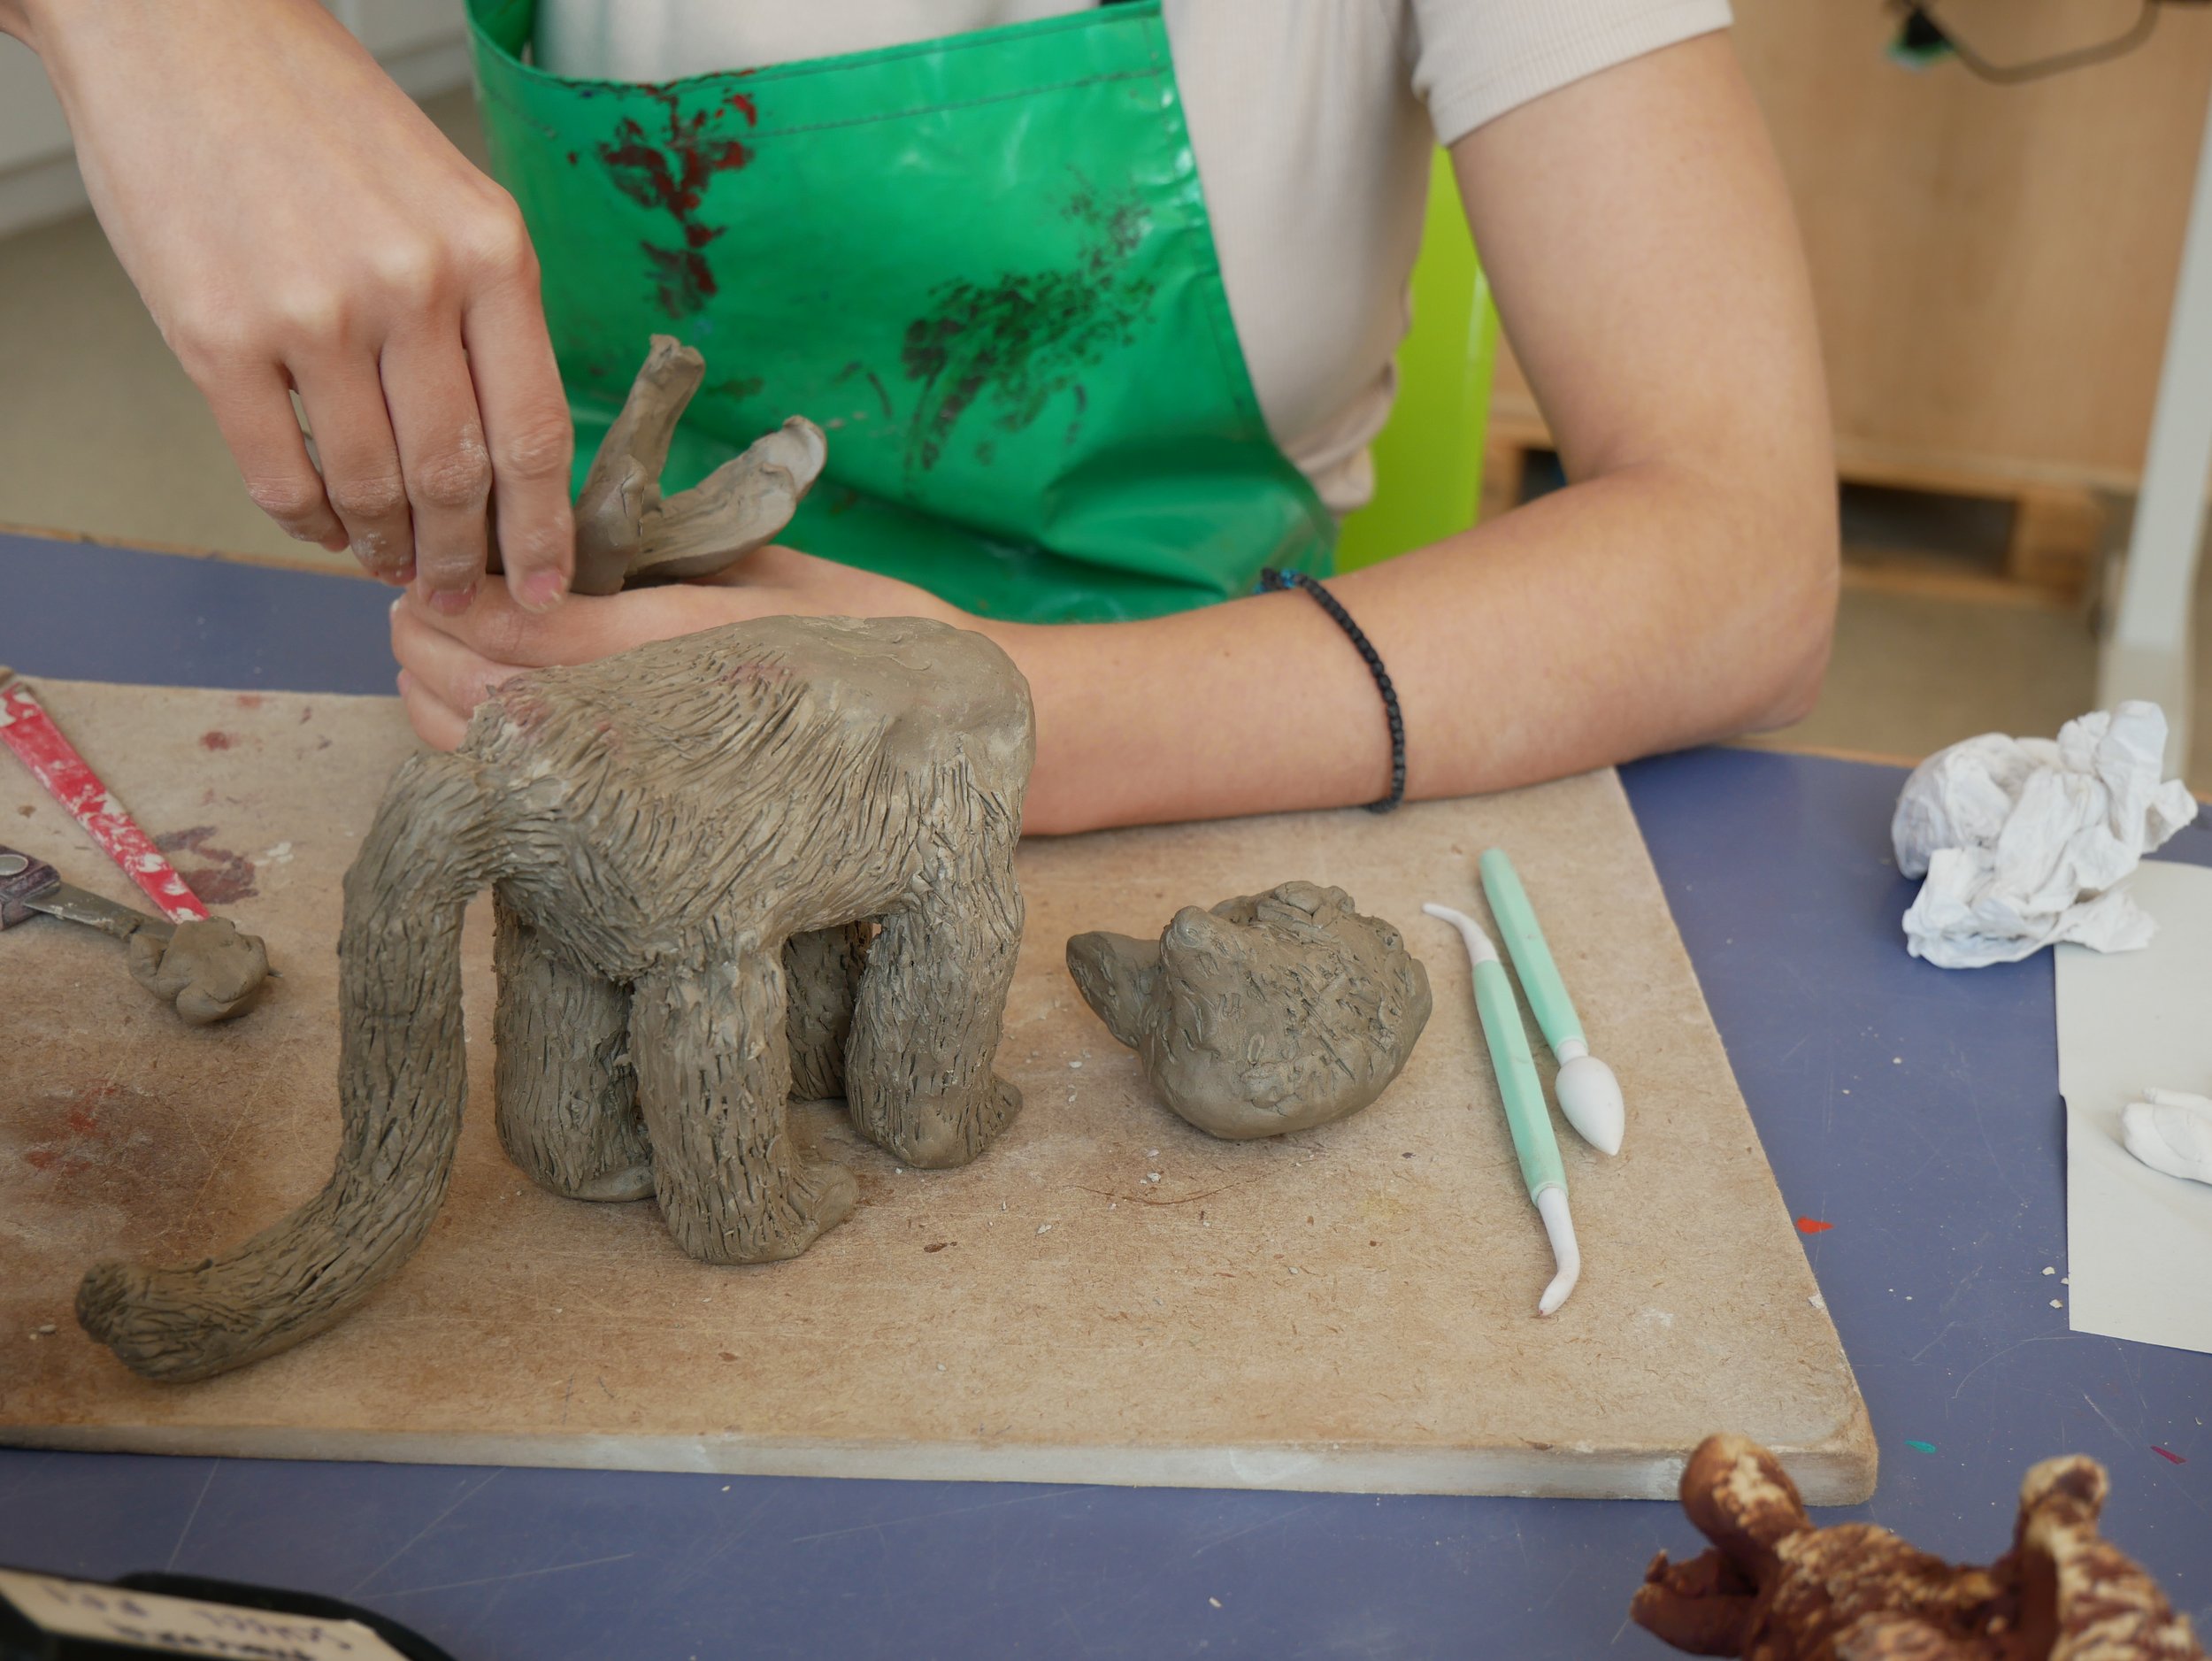  Leslie and Eleni working on clay animal sculptures together in the Venture Arts studio. Leslie is on the left and Eleni is on the right, both working on wooden boards. The photos show the animals in varying places along the journey of becoming full 